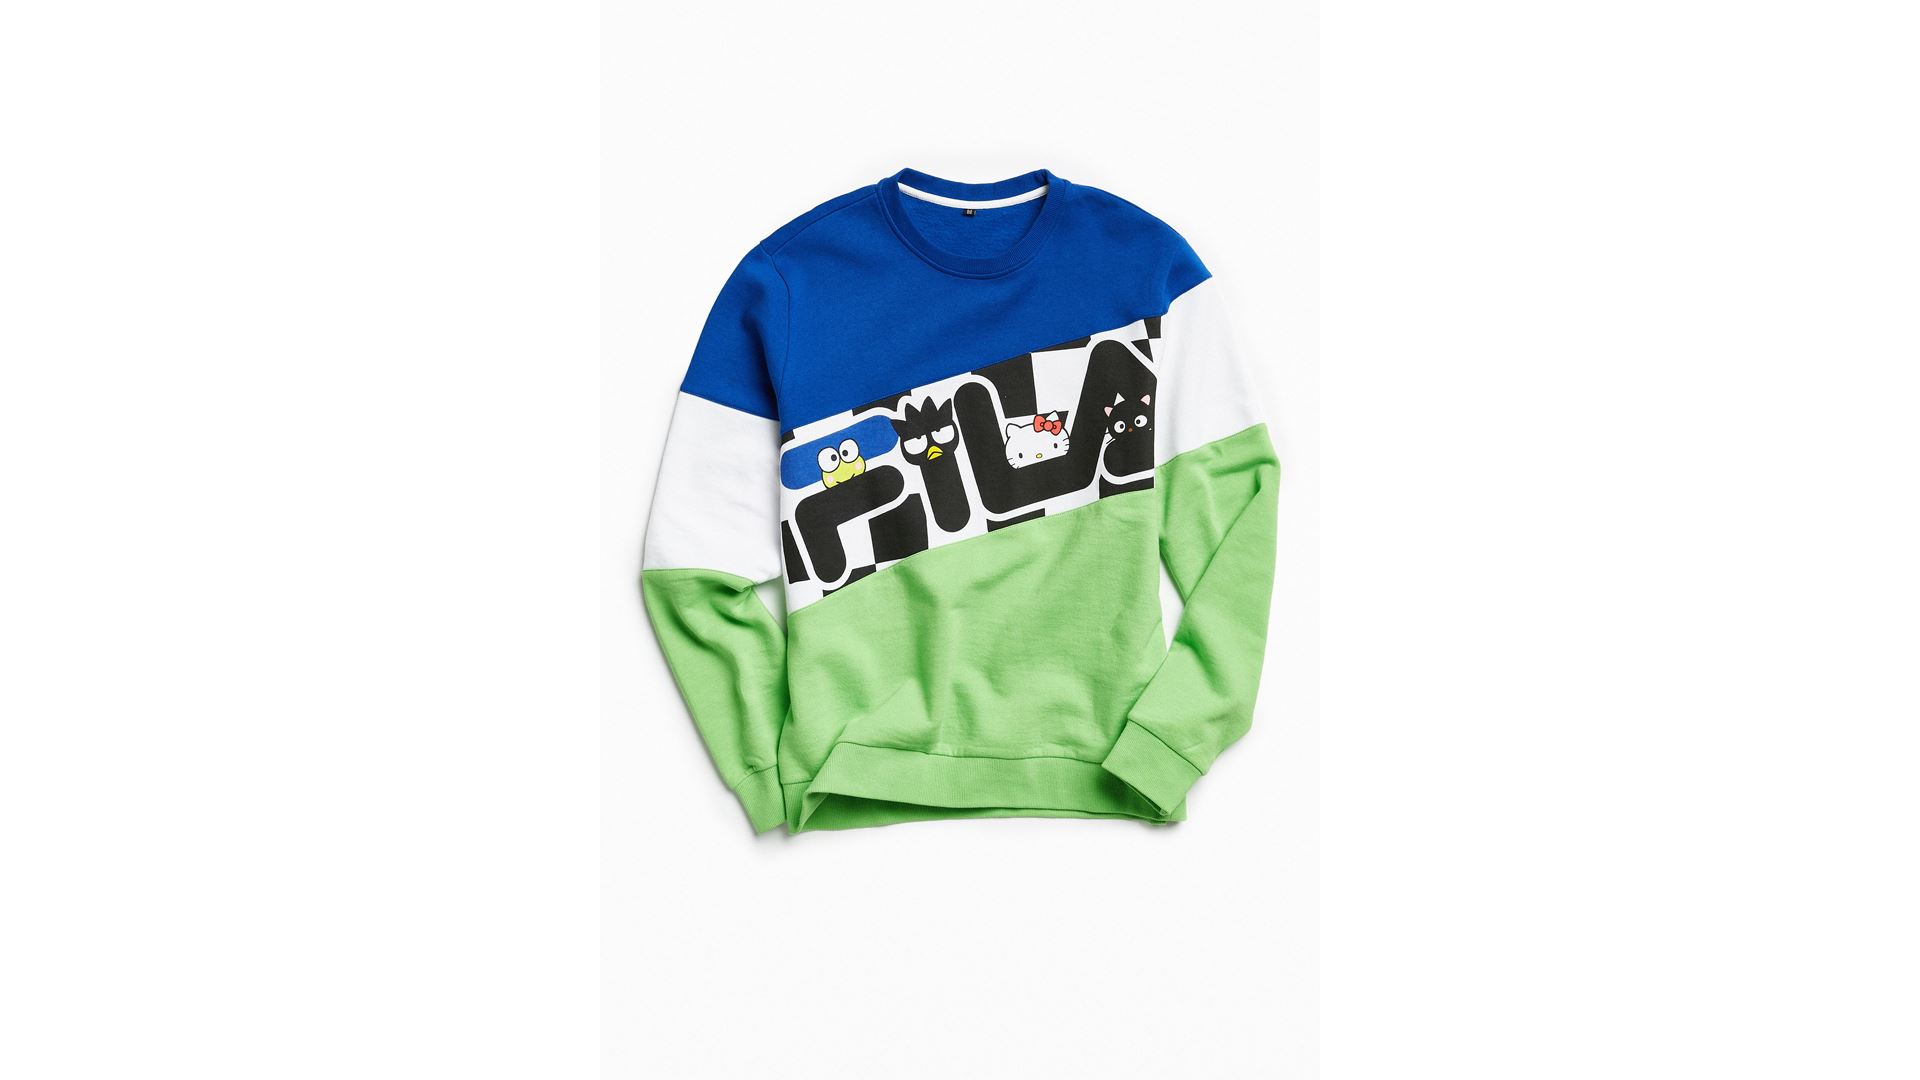 FILA x Sanrio Collection Featuring Hello Kitty Launches at Urban Outfitters